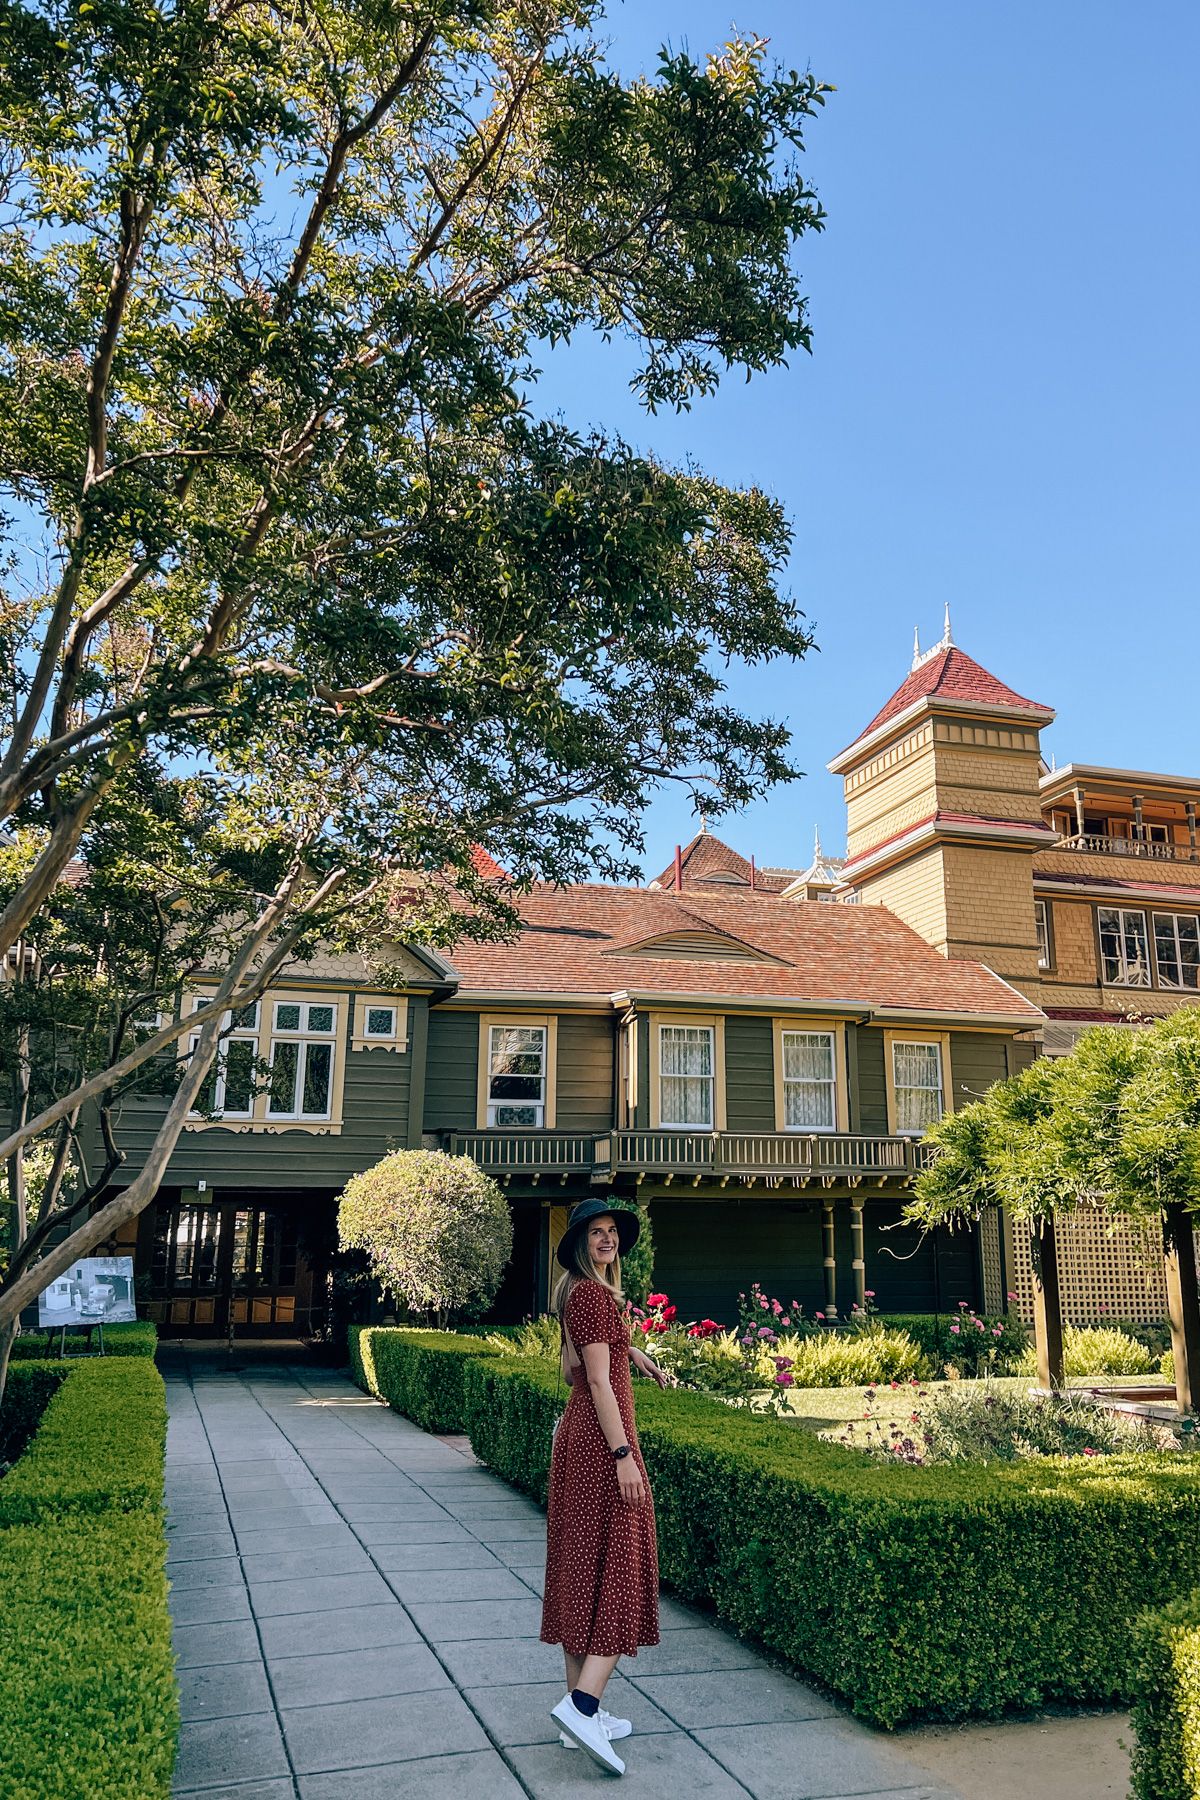 San Francisco Haunted Houses: A young woman in a red polka-dot dress and a wide-brimmed black hat looks back over her shoulder in the shaded, manicured garden of a victorian house.